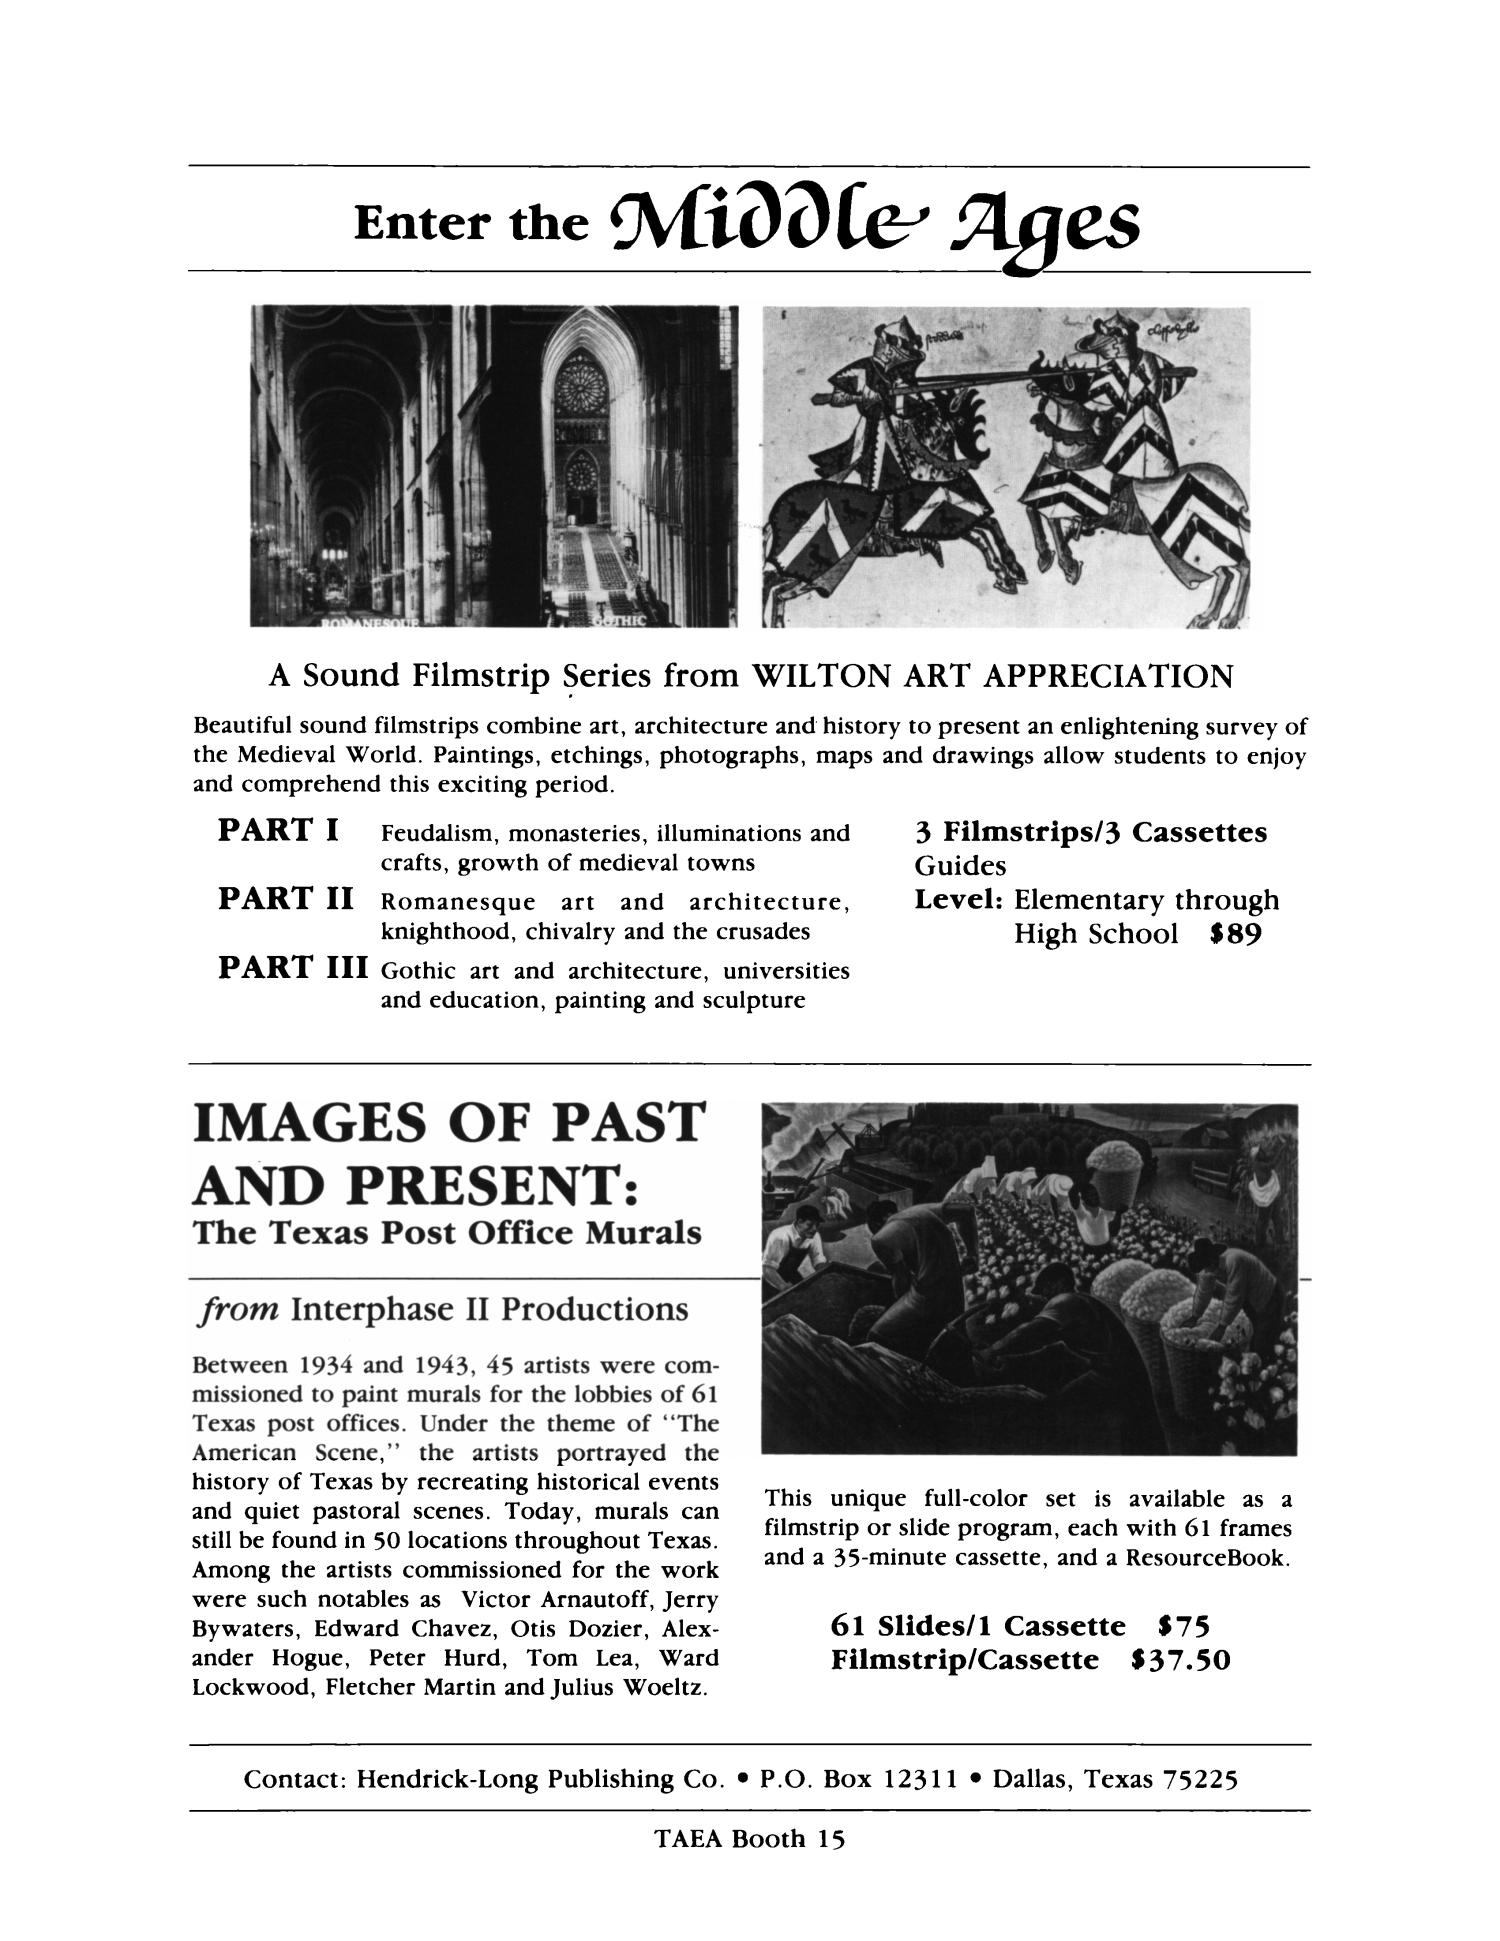 Texas Trends in Art Education, Volume 2, Number 8, Fall 1983
                                                
                                                    Front Inside
                                                